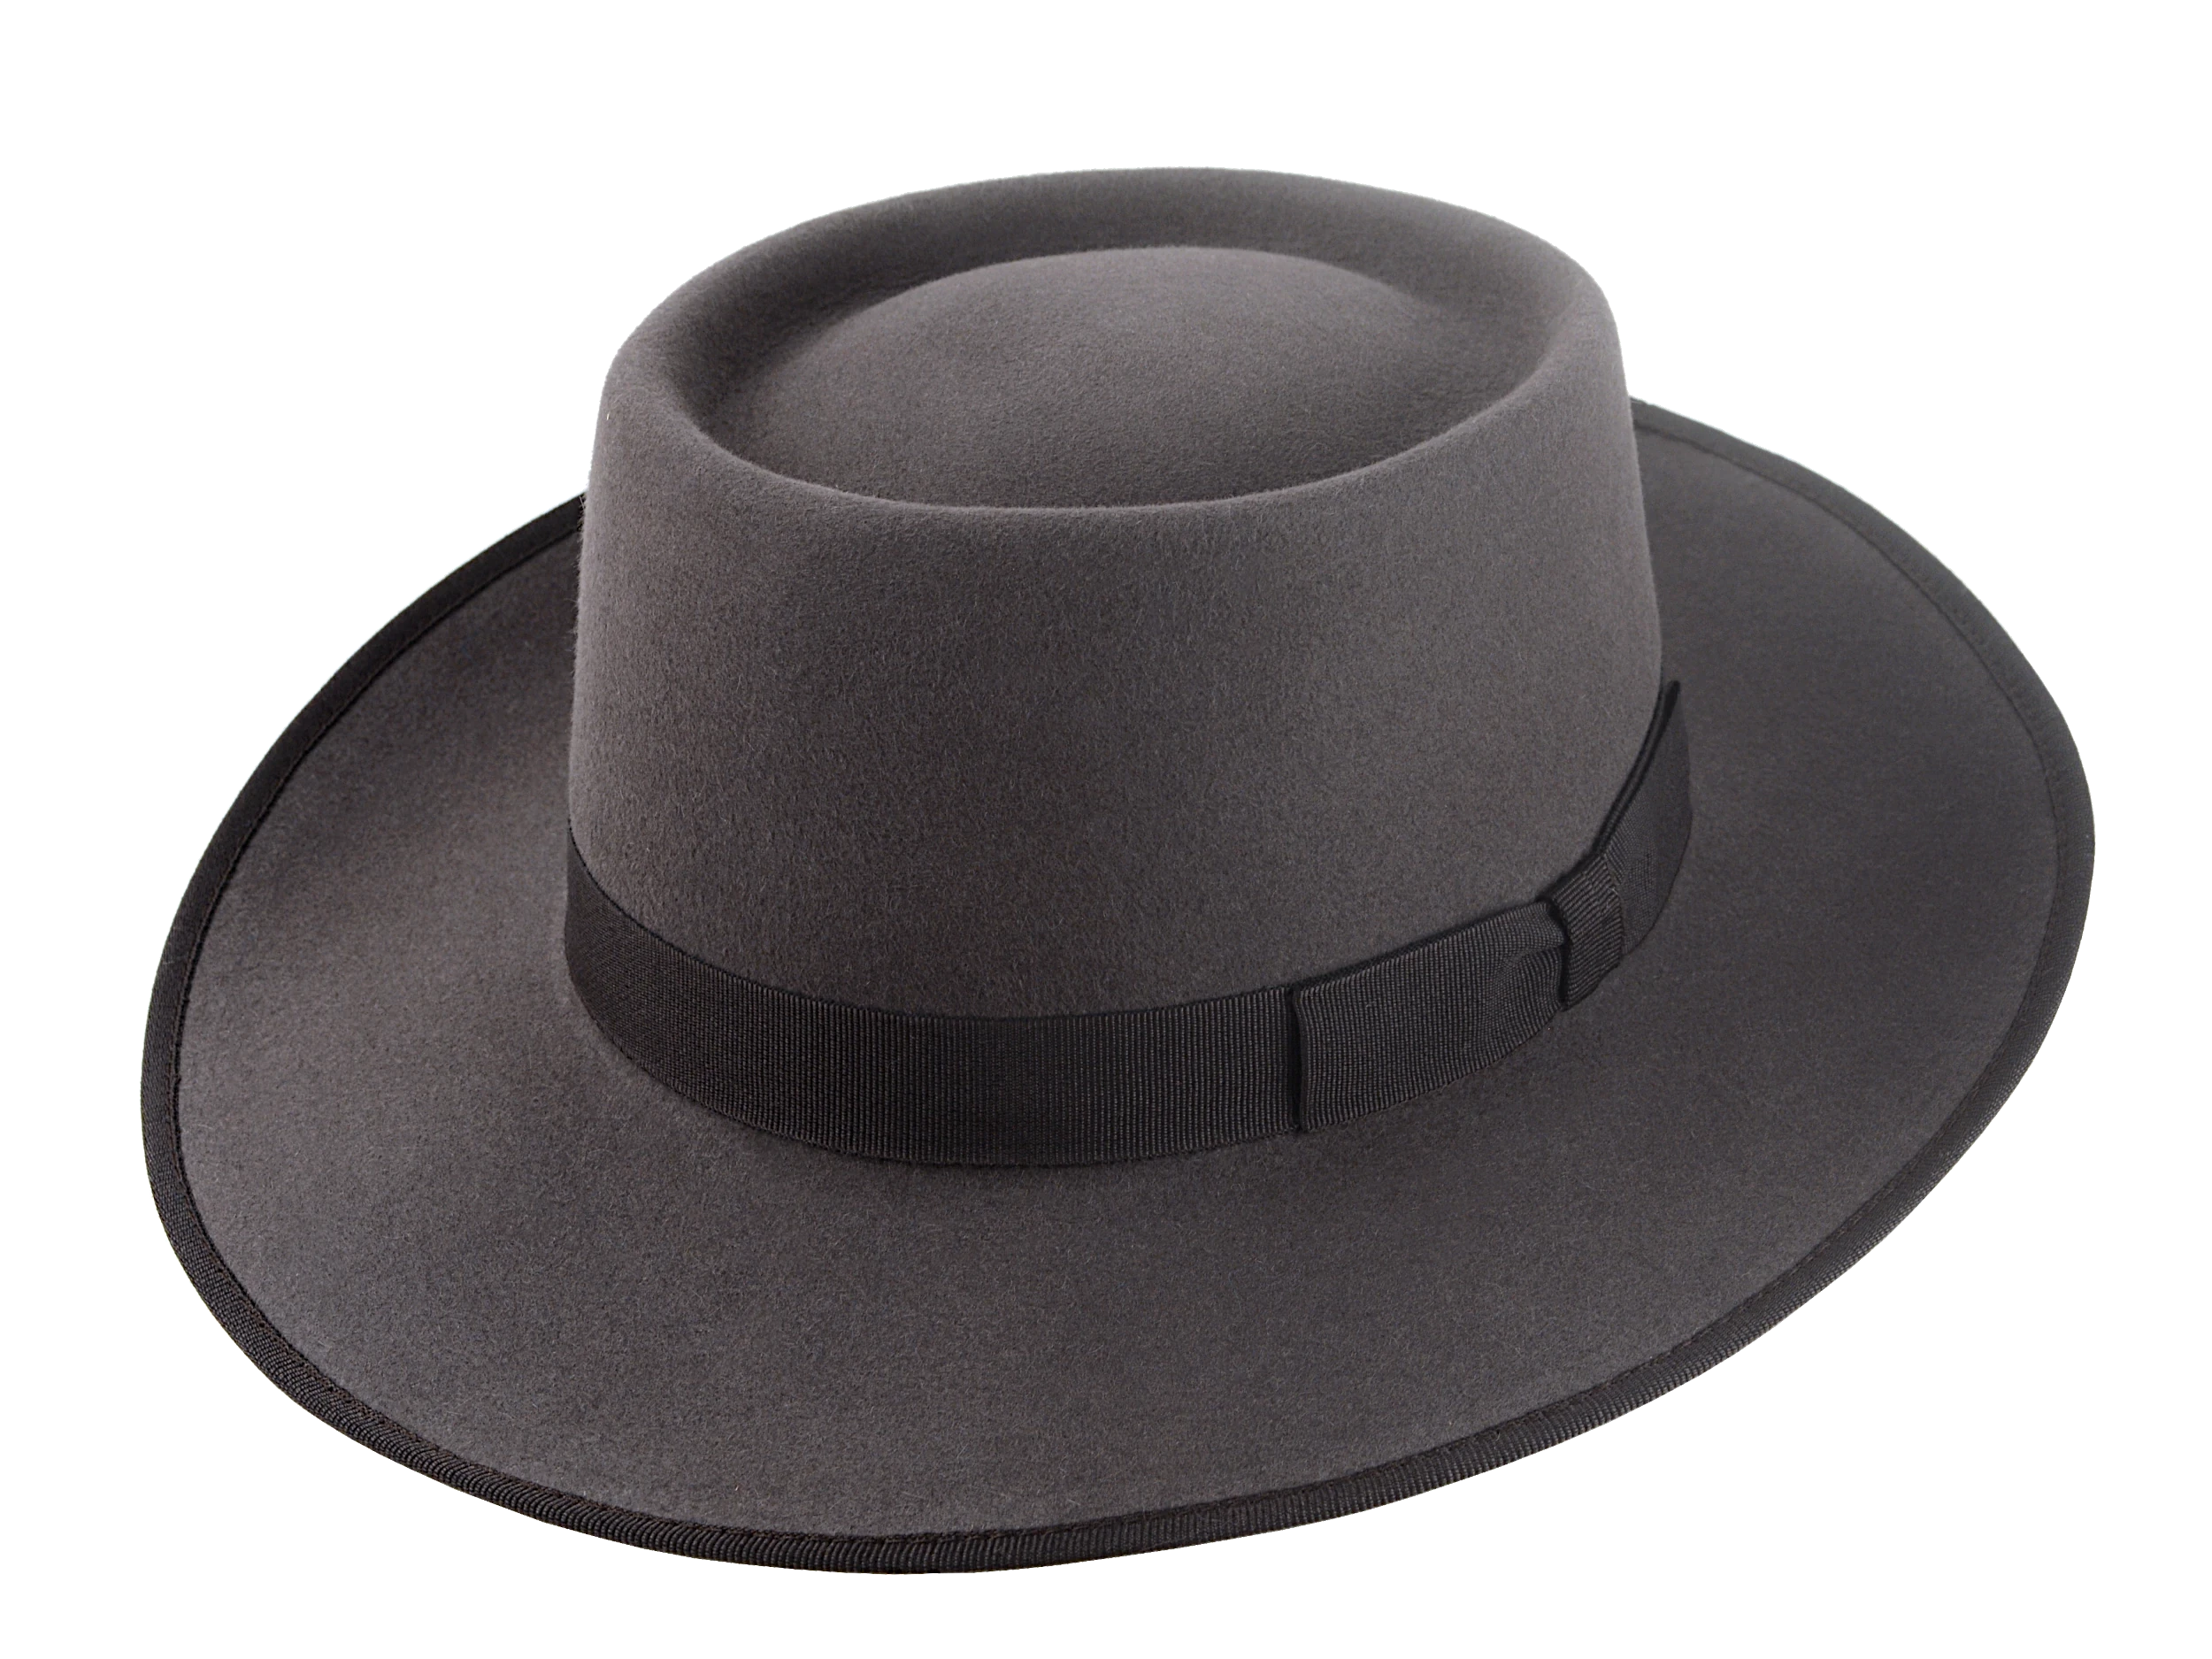 The Oppenheimer: Showcase of the Fedora's overall silhouette and design | Agnoulita Hats